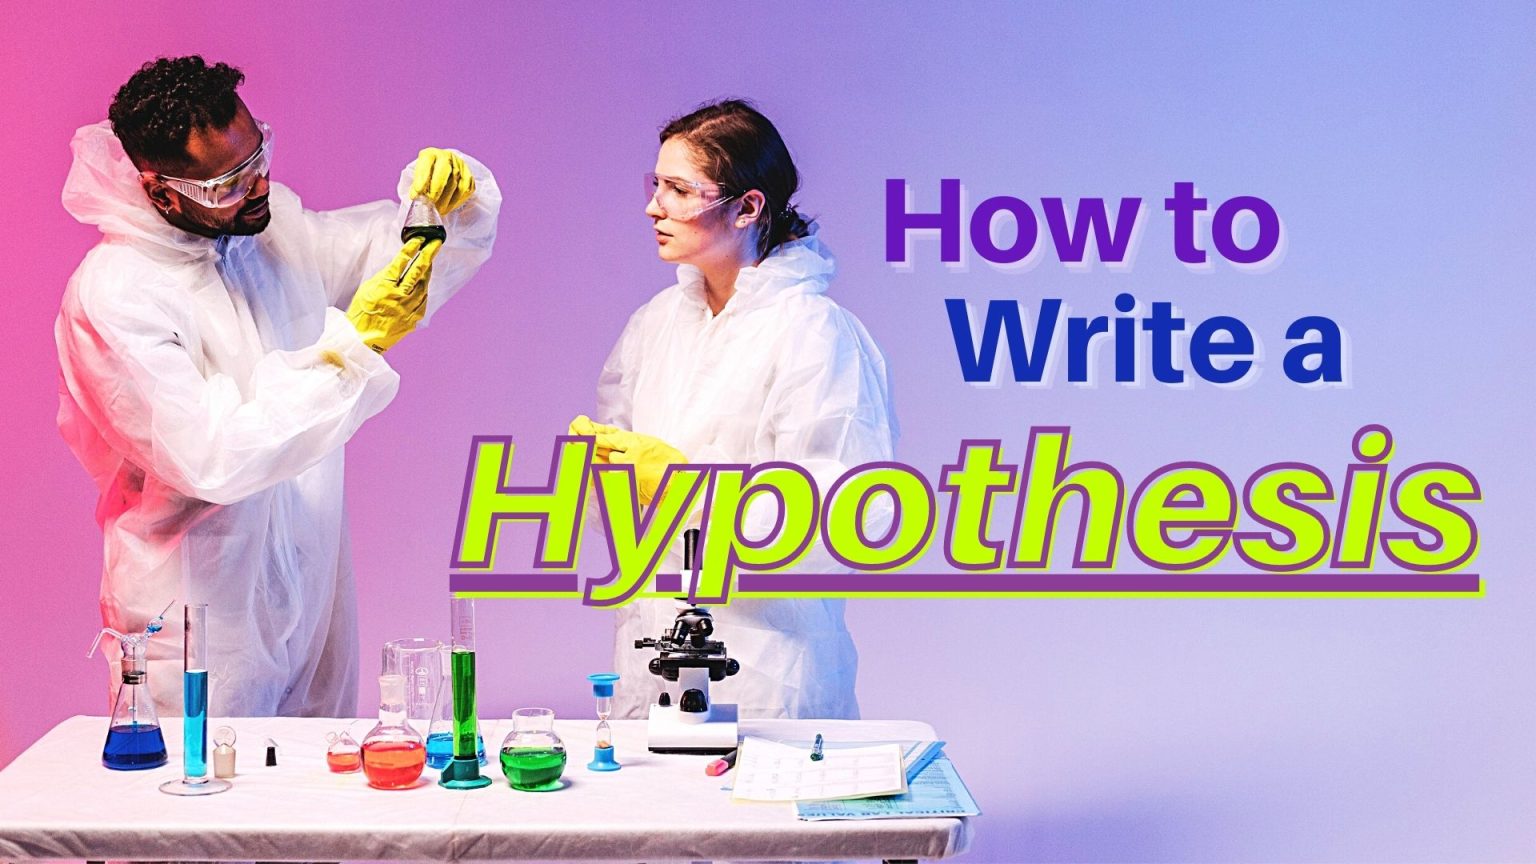 hypothesis being used in a sentence